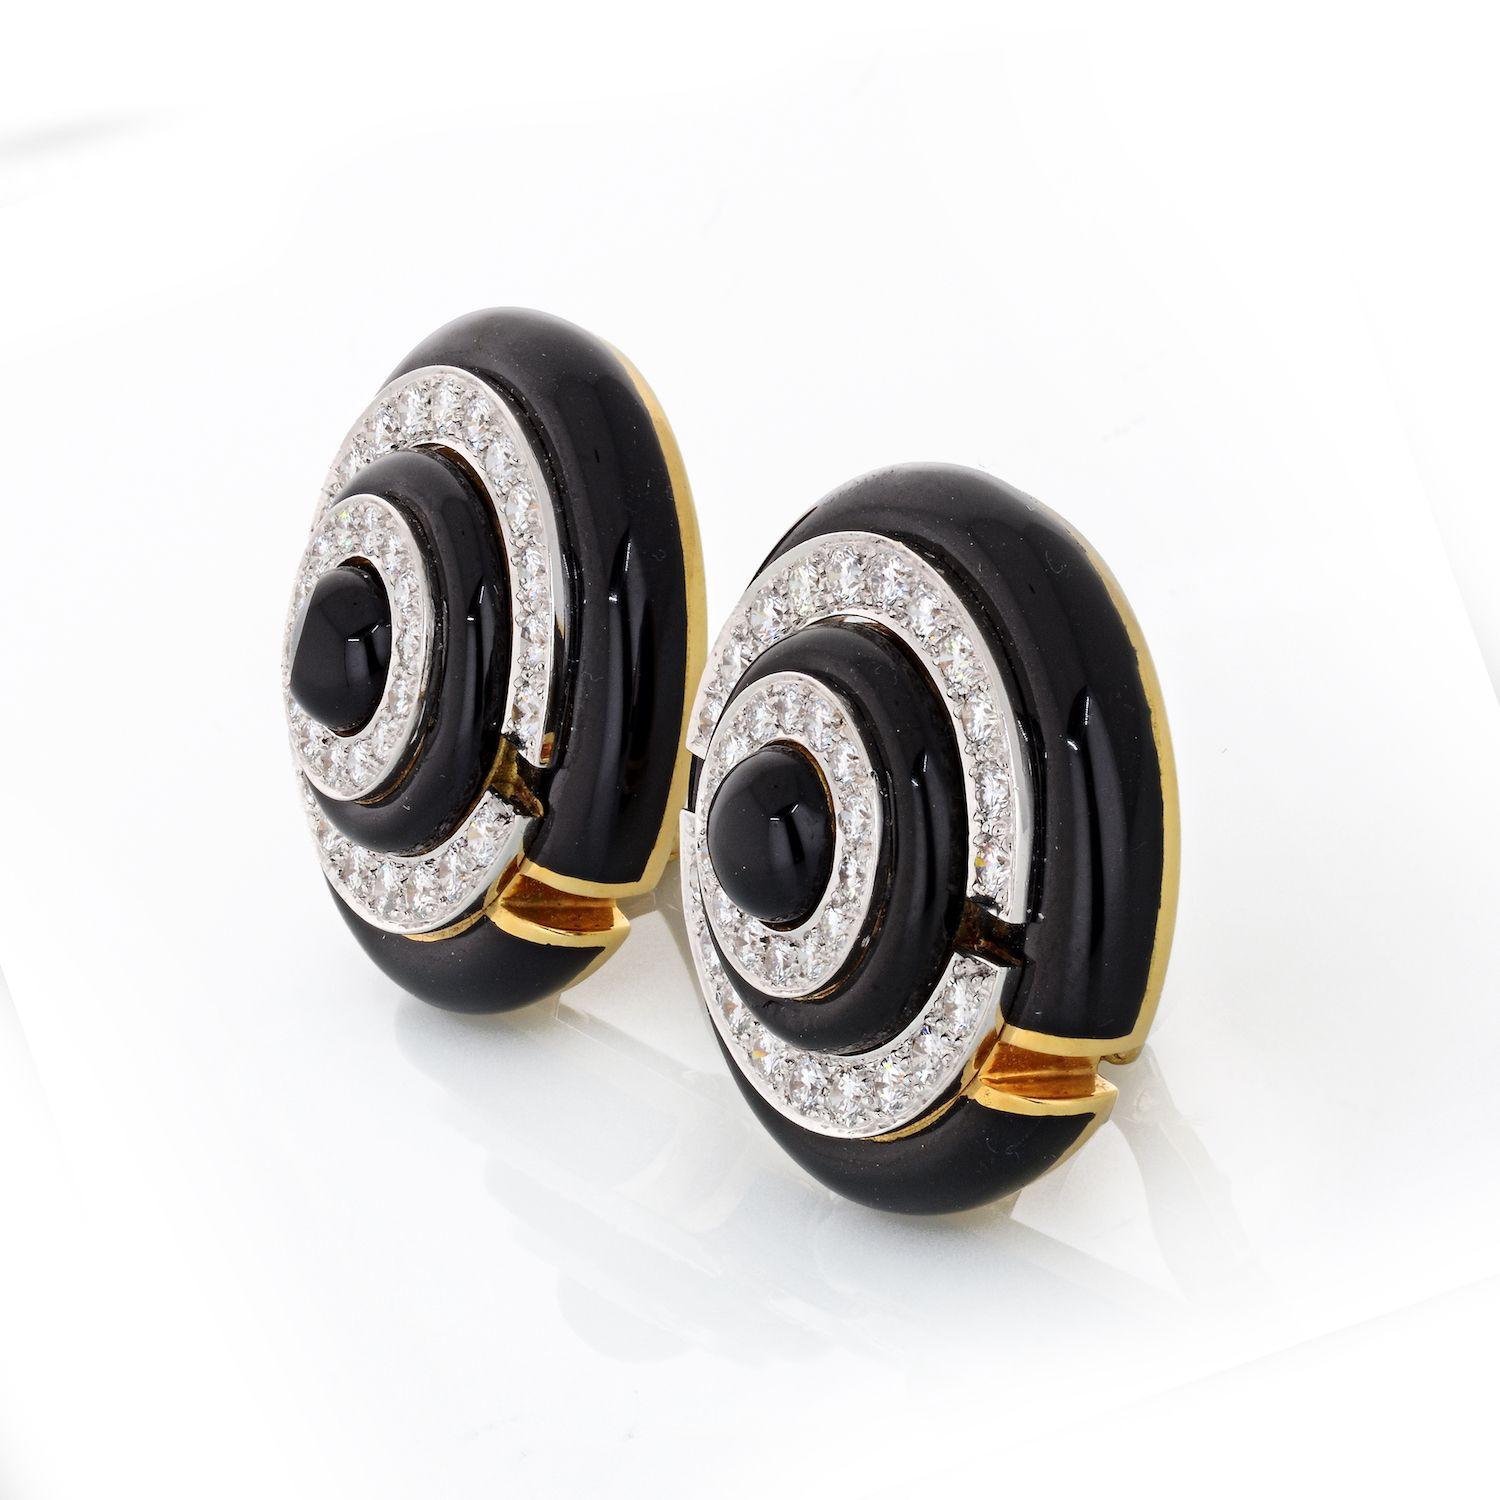 The slightly domed earrings centering upon three diamond separated by black enamel stripes, framed by black enamel, in 18K gold and platinum. Dsigned in a circle shape these earrings look chic and sophisticated. Color combination of black and white